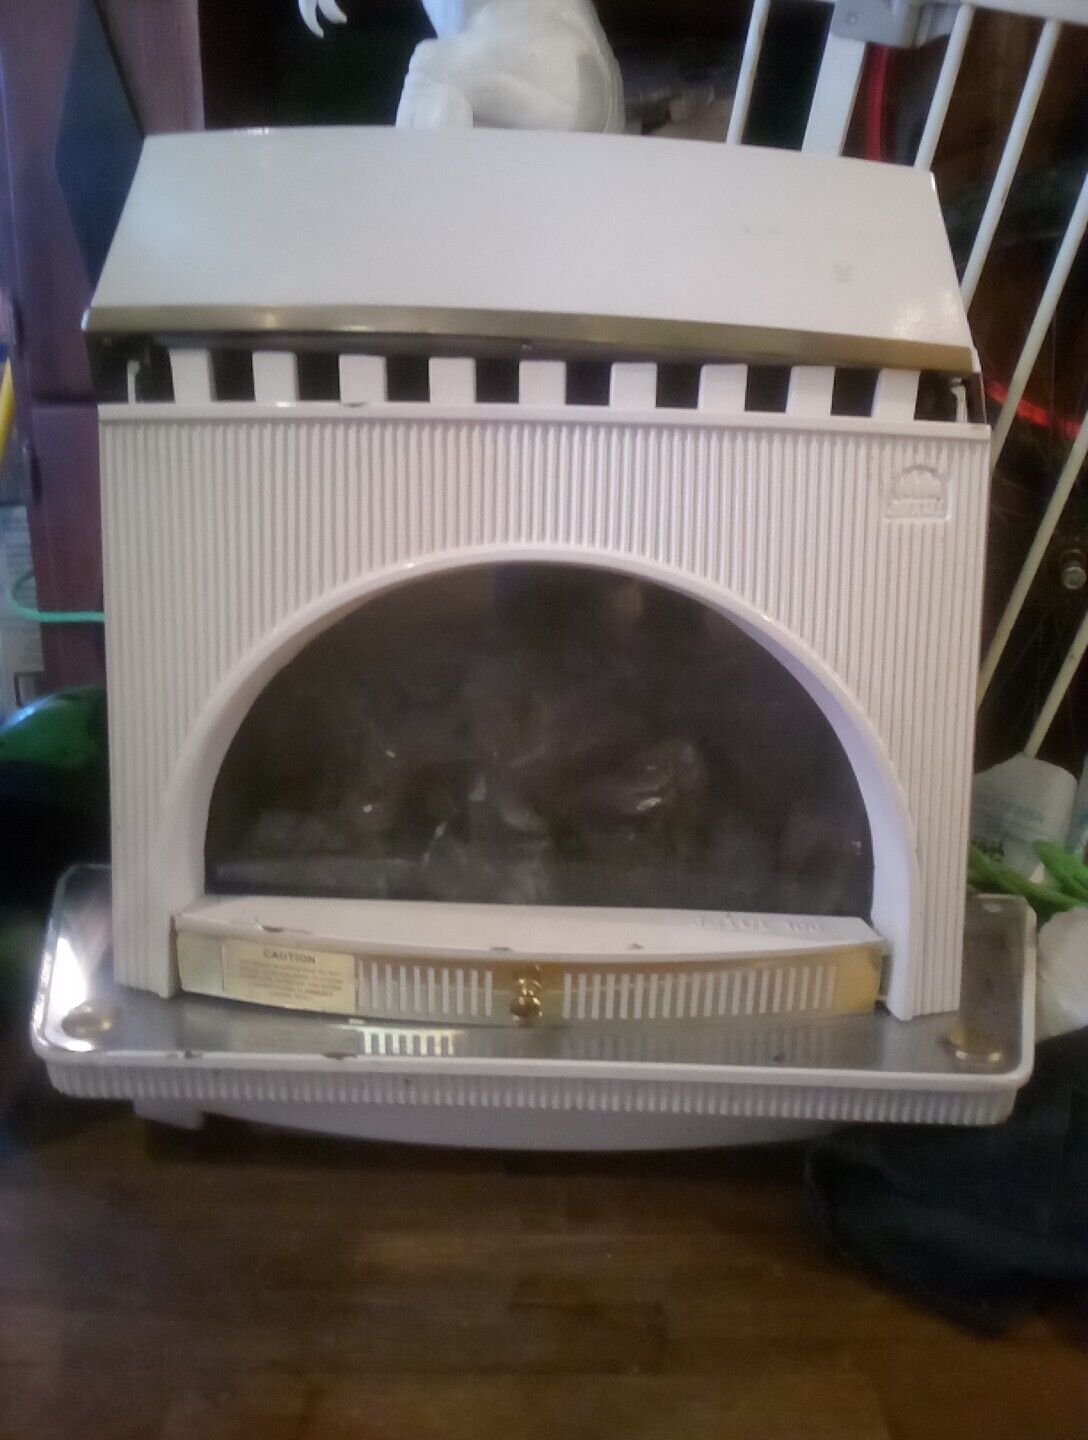 Jotul 100 Gas Wood Stove.Beige Newer.Will go good in any home.